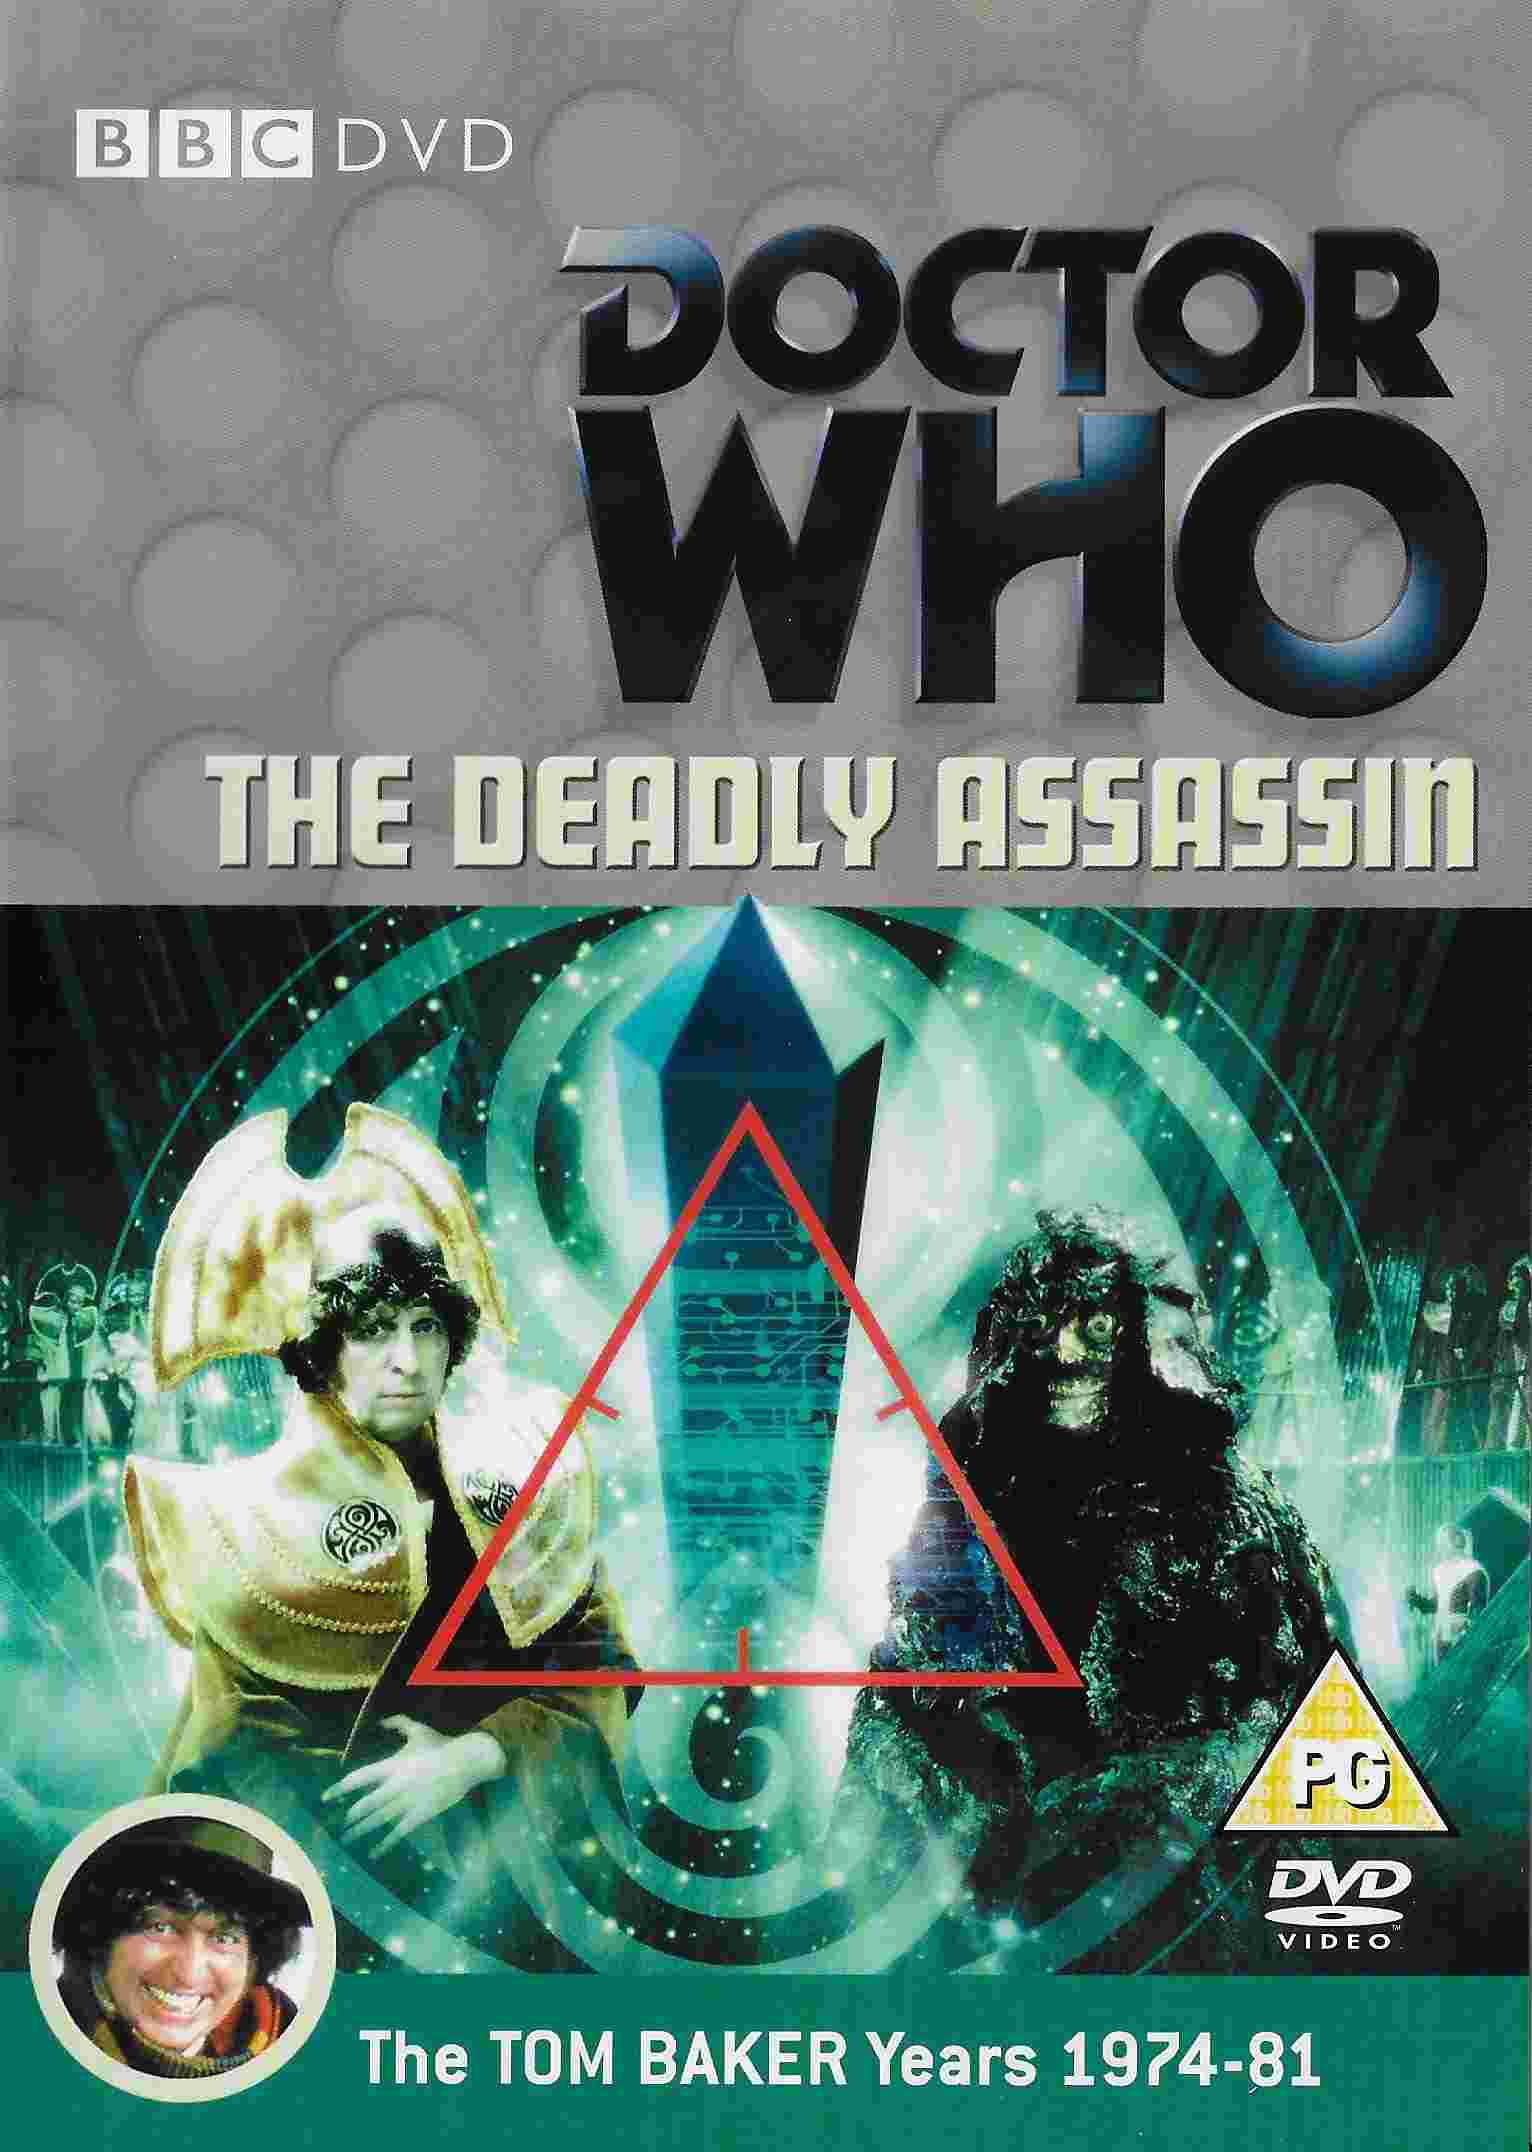 Picture of BBCDVD 2430 Doctor Who - The deadly assassin by artist Robert Holmes from the BBC dvds - Records and Tapes library